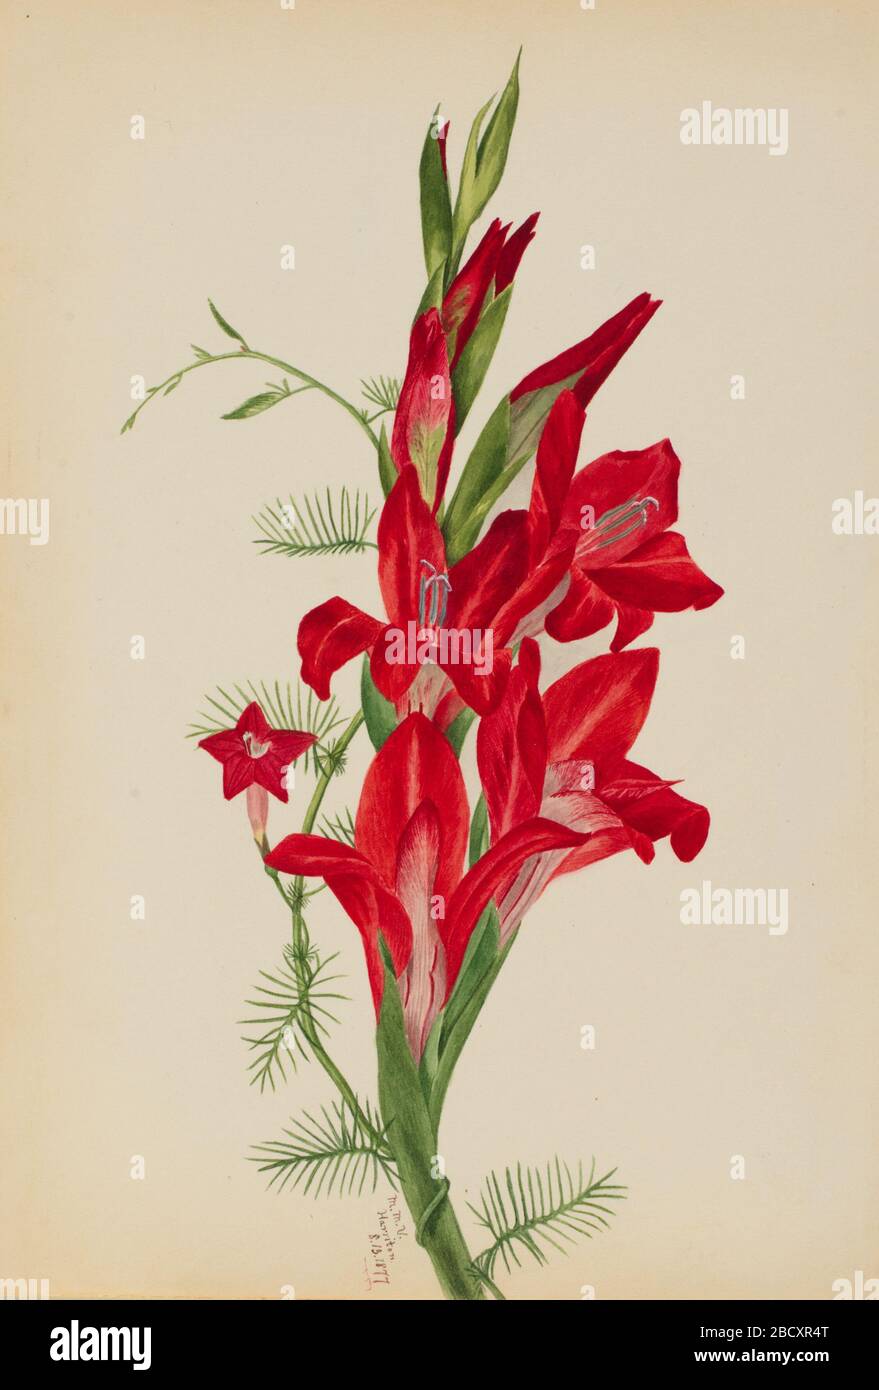 Cannas and Cypress Vine Canna species and Ipomoea quamoclit. Stock Photo